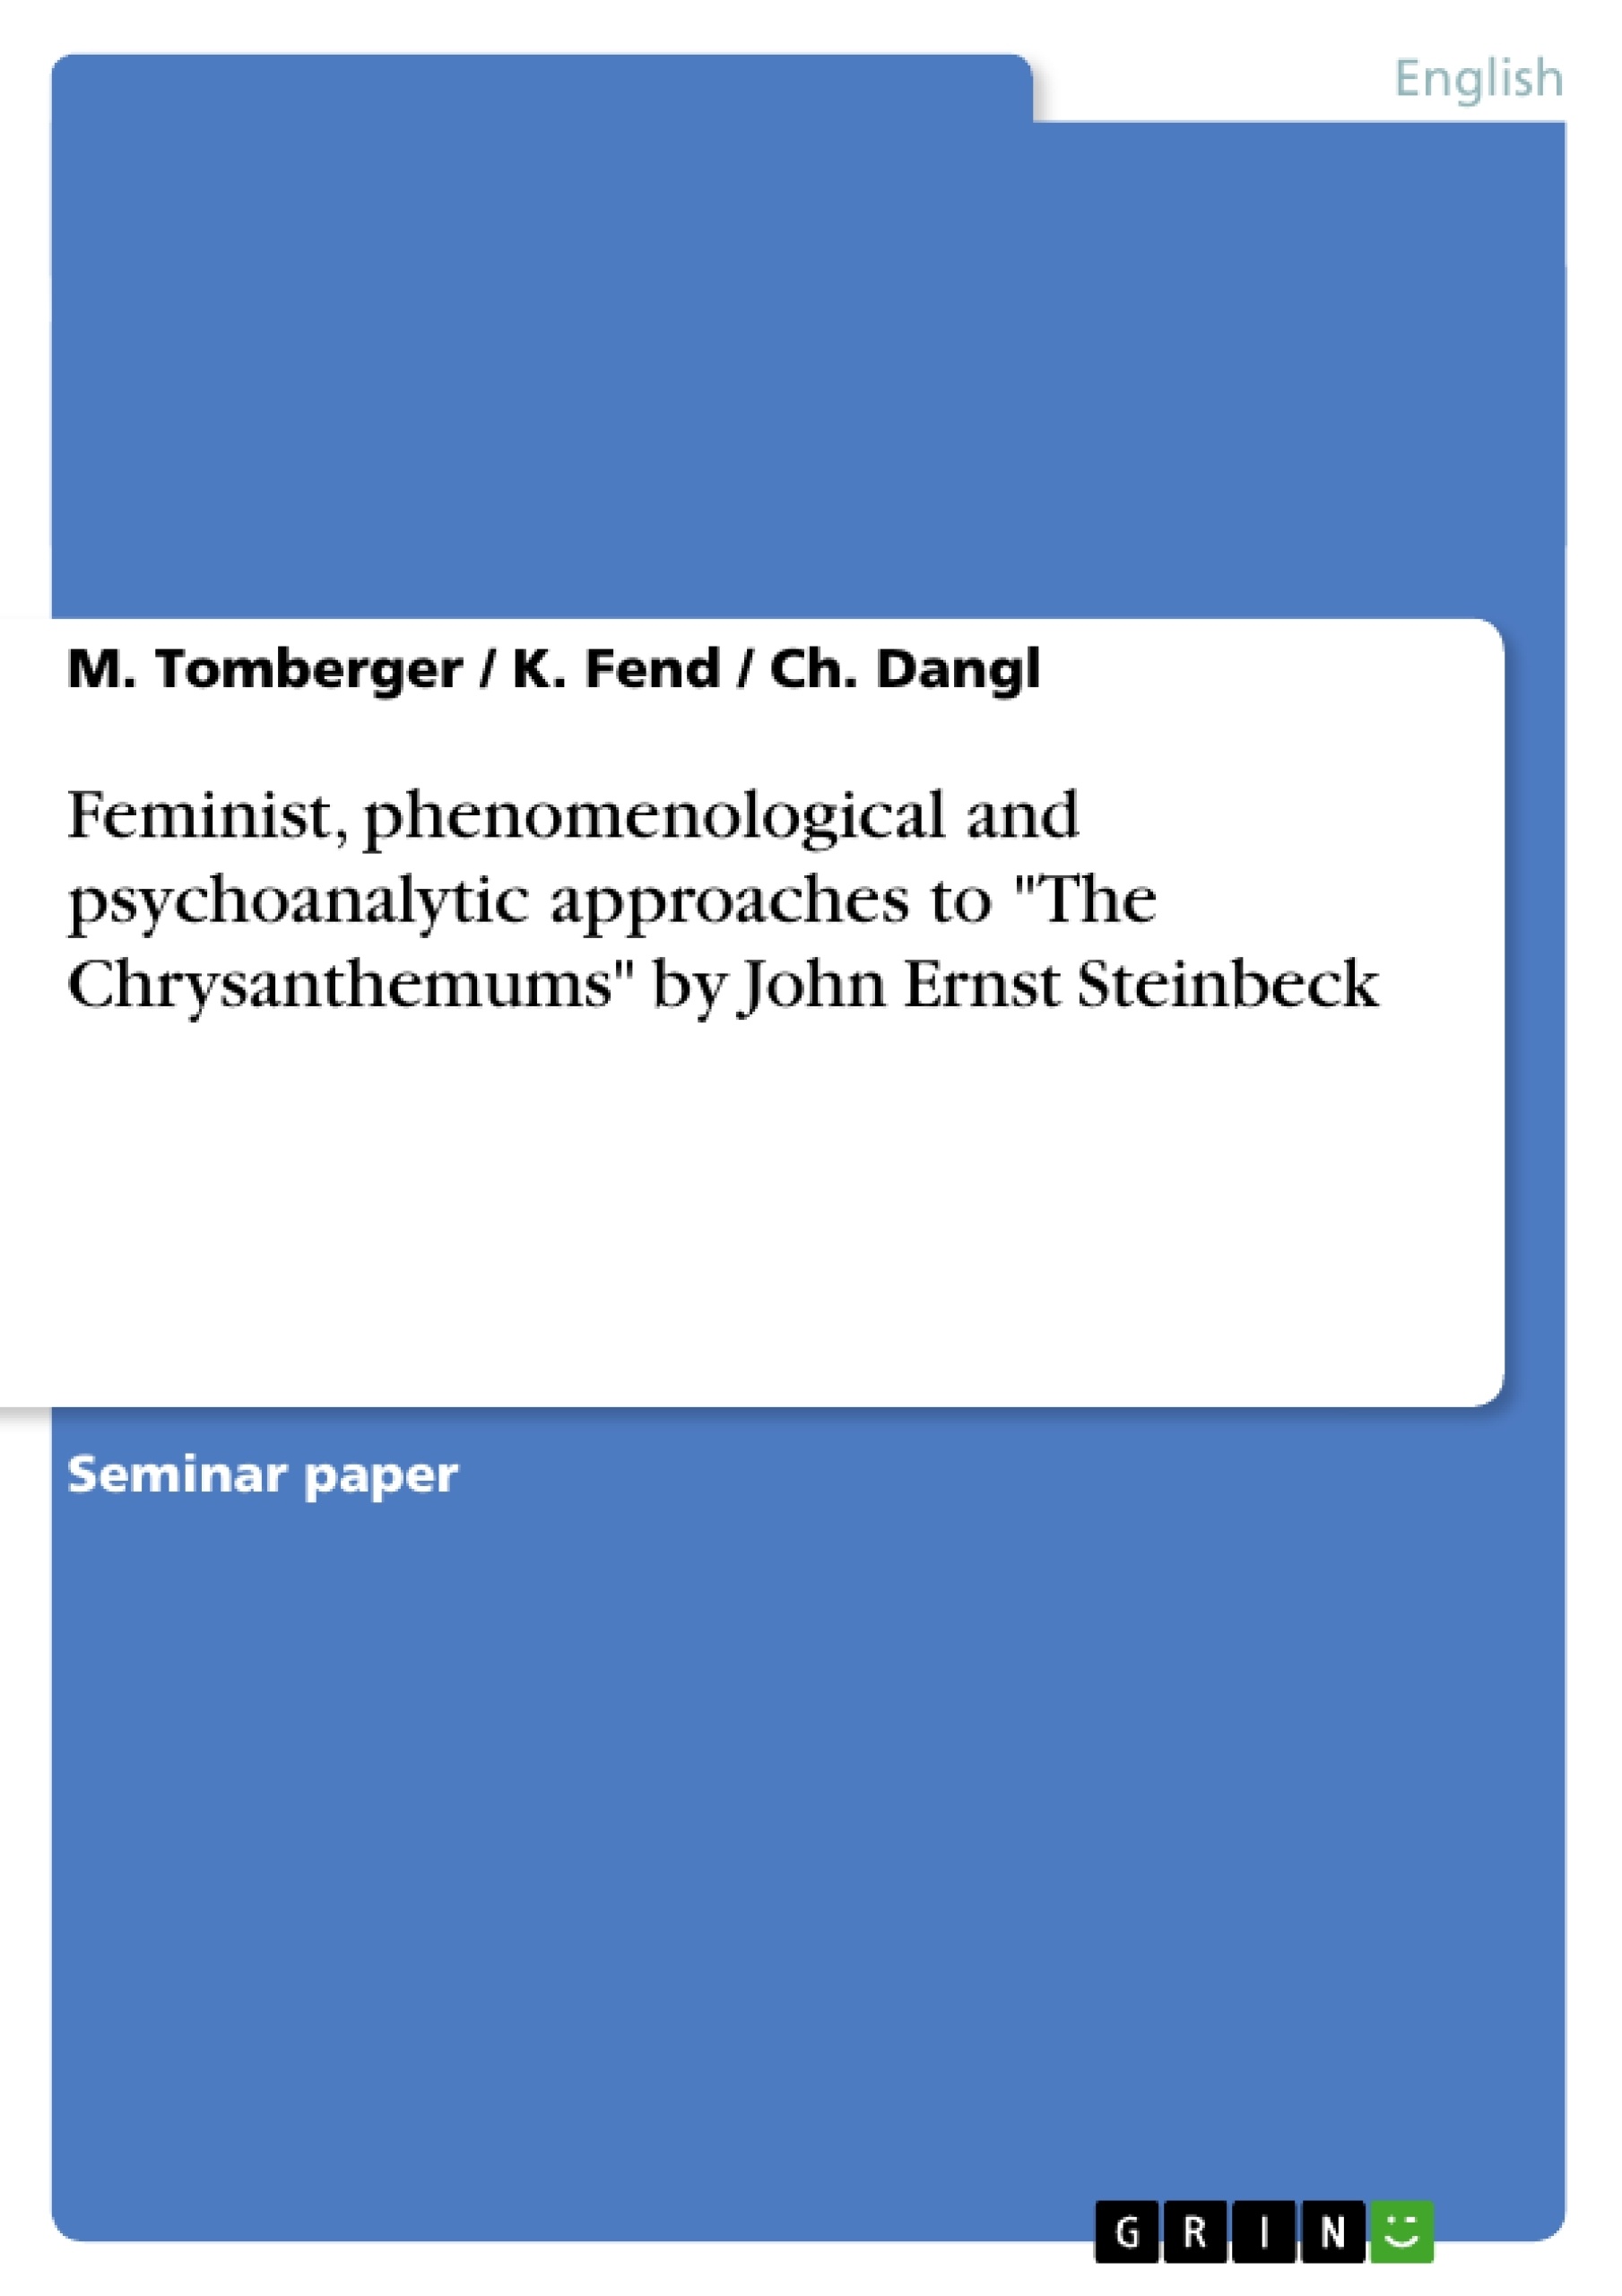 Title: Feminist, phenomenological and psychoanalytic approaches to "The Chrysanthemums" by John Ernst Steinbeck